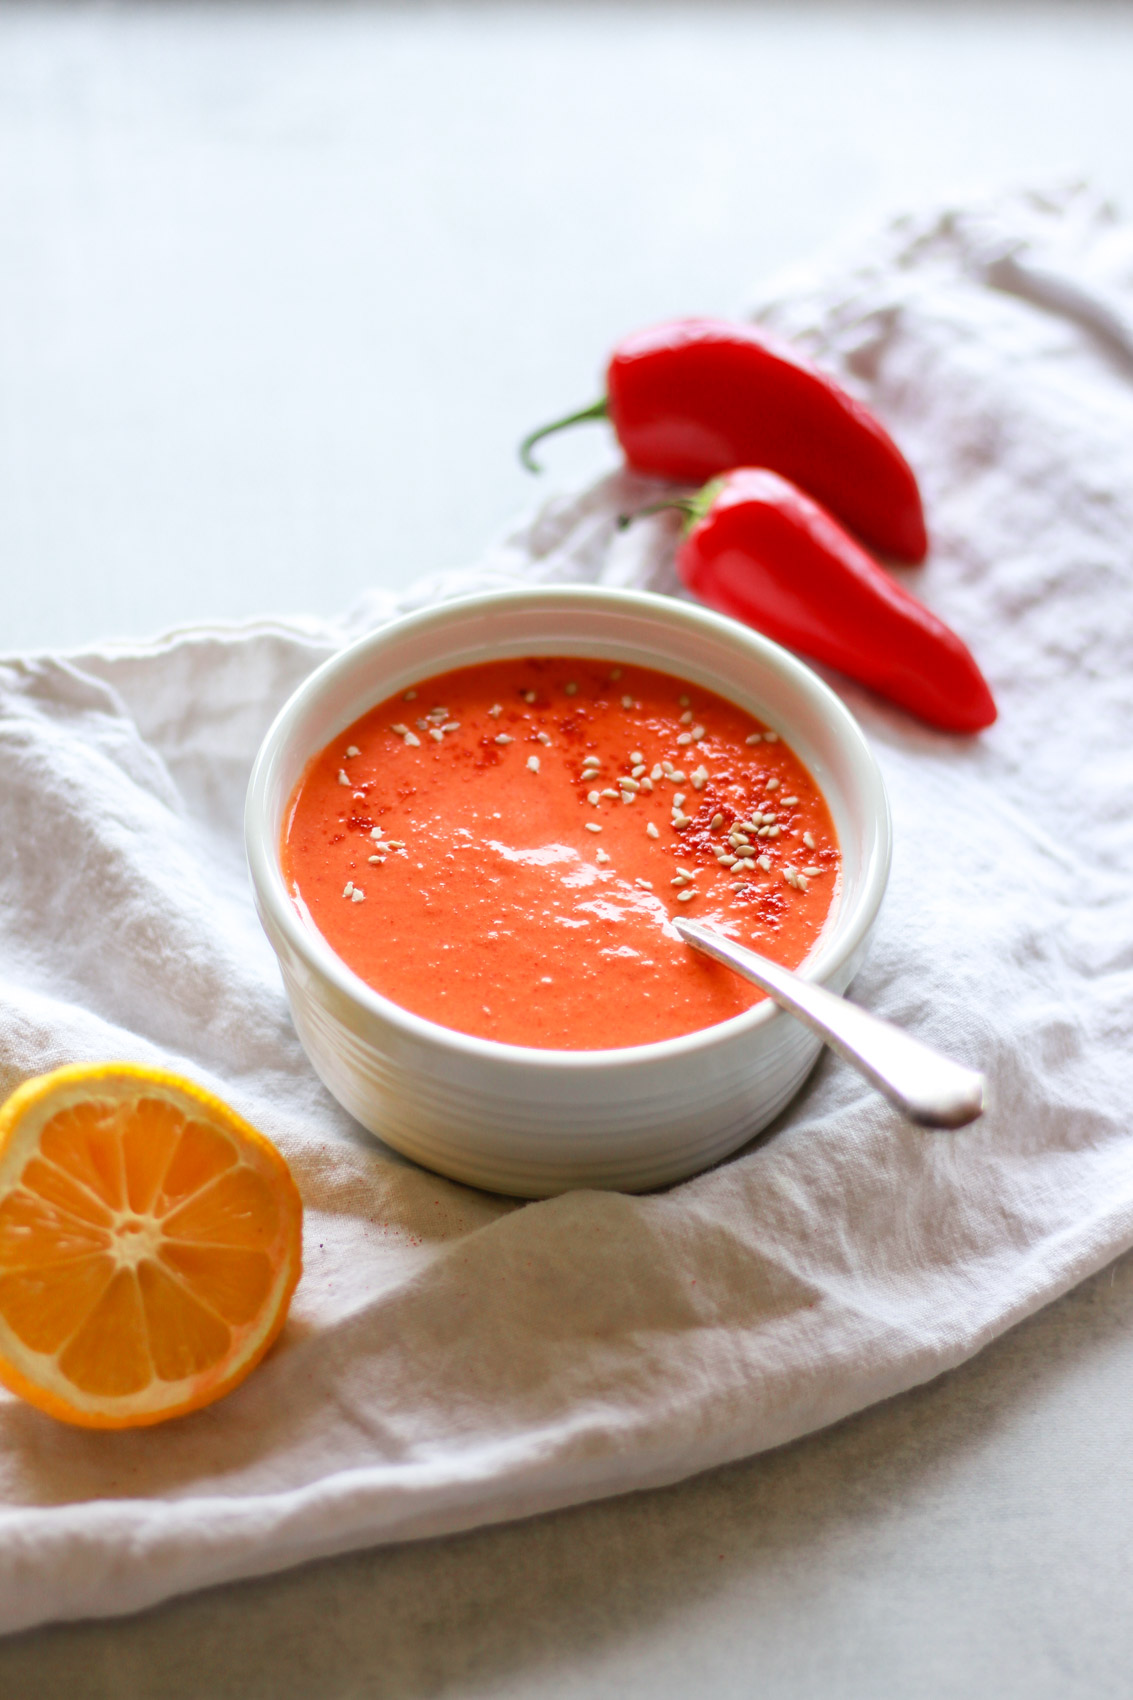 This roasted red pepper tahini sauce is a vegan recipe that is super creamy, oil-free, and perfect over pasta. It is made of sesame paste and roasted red bell peppers.